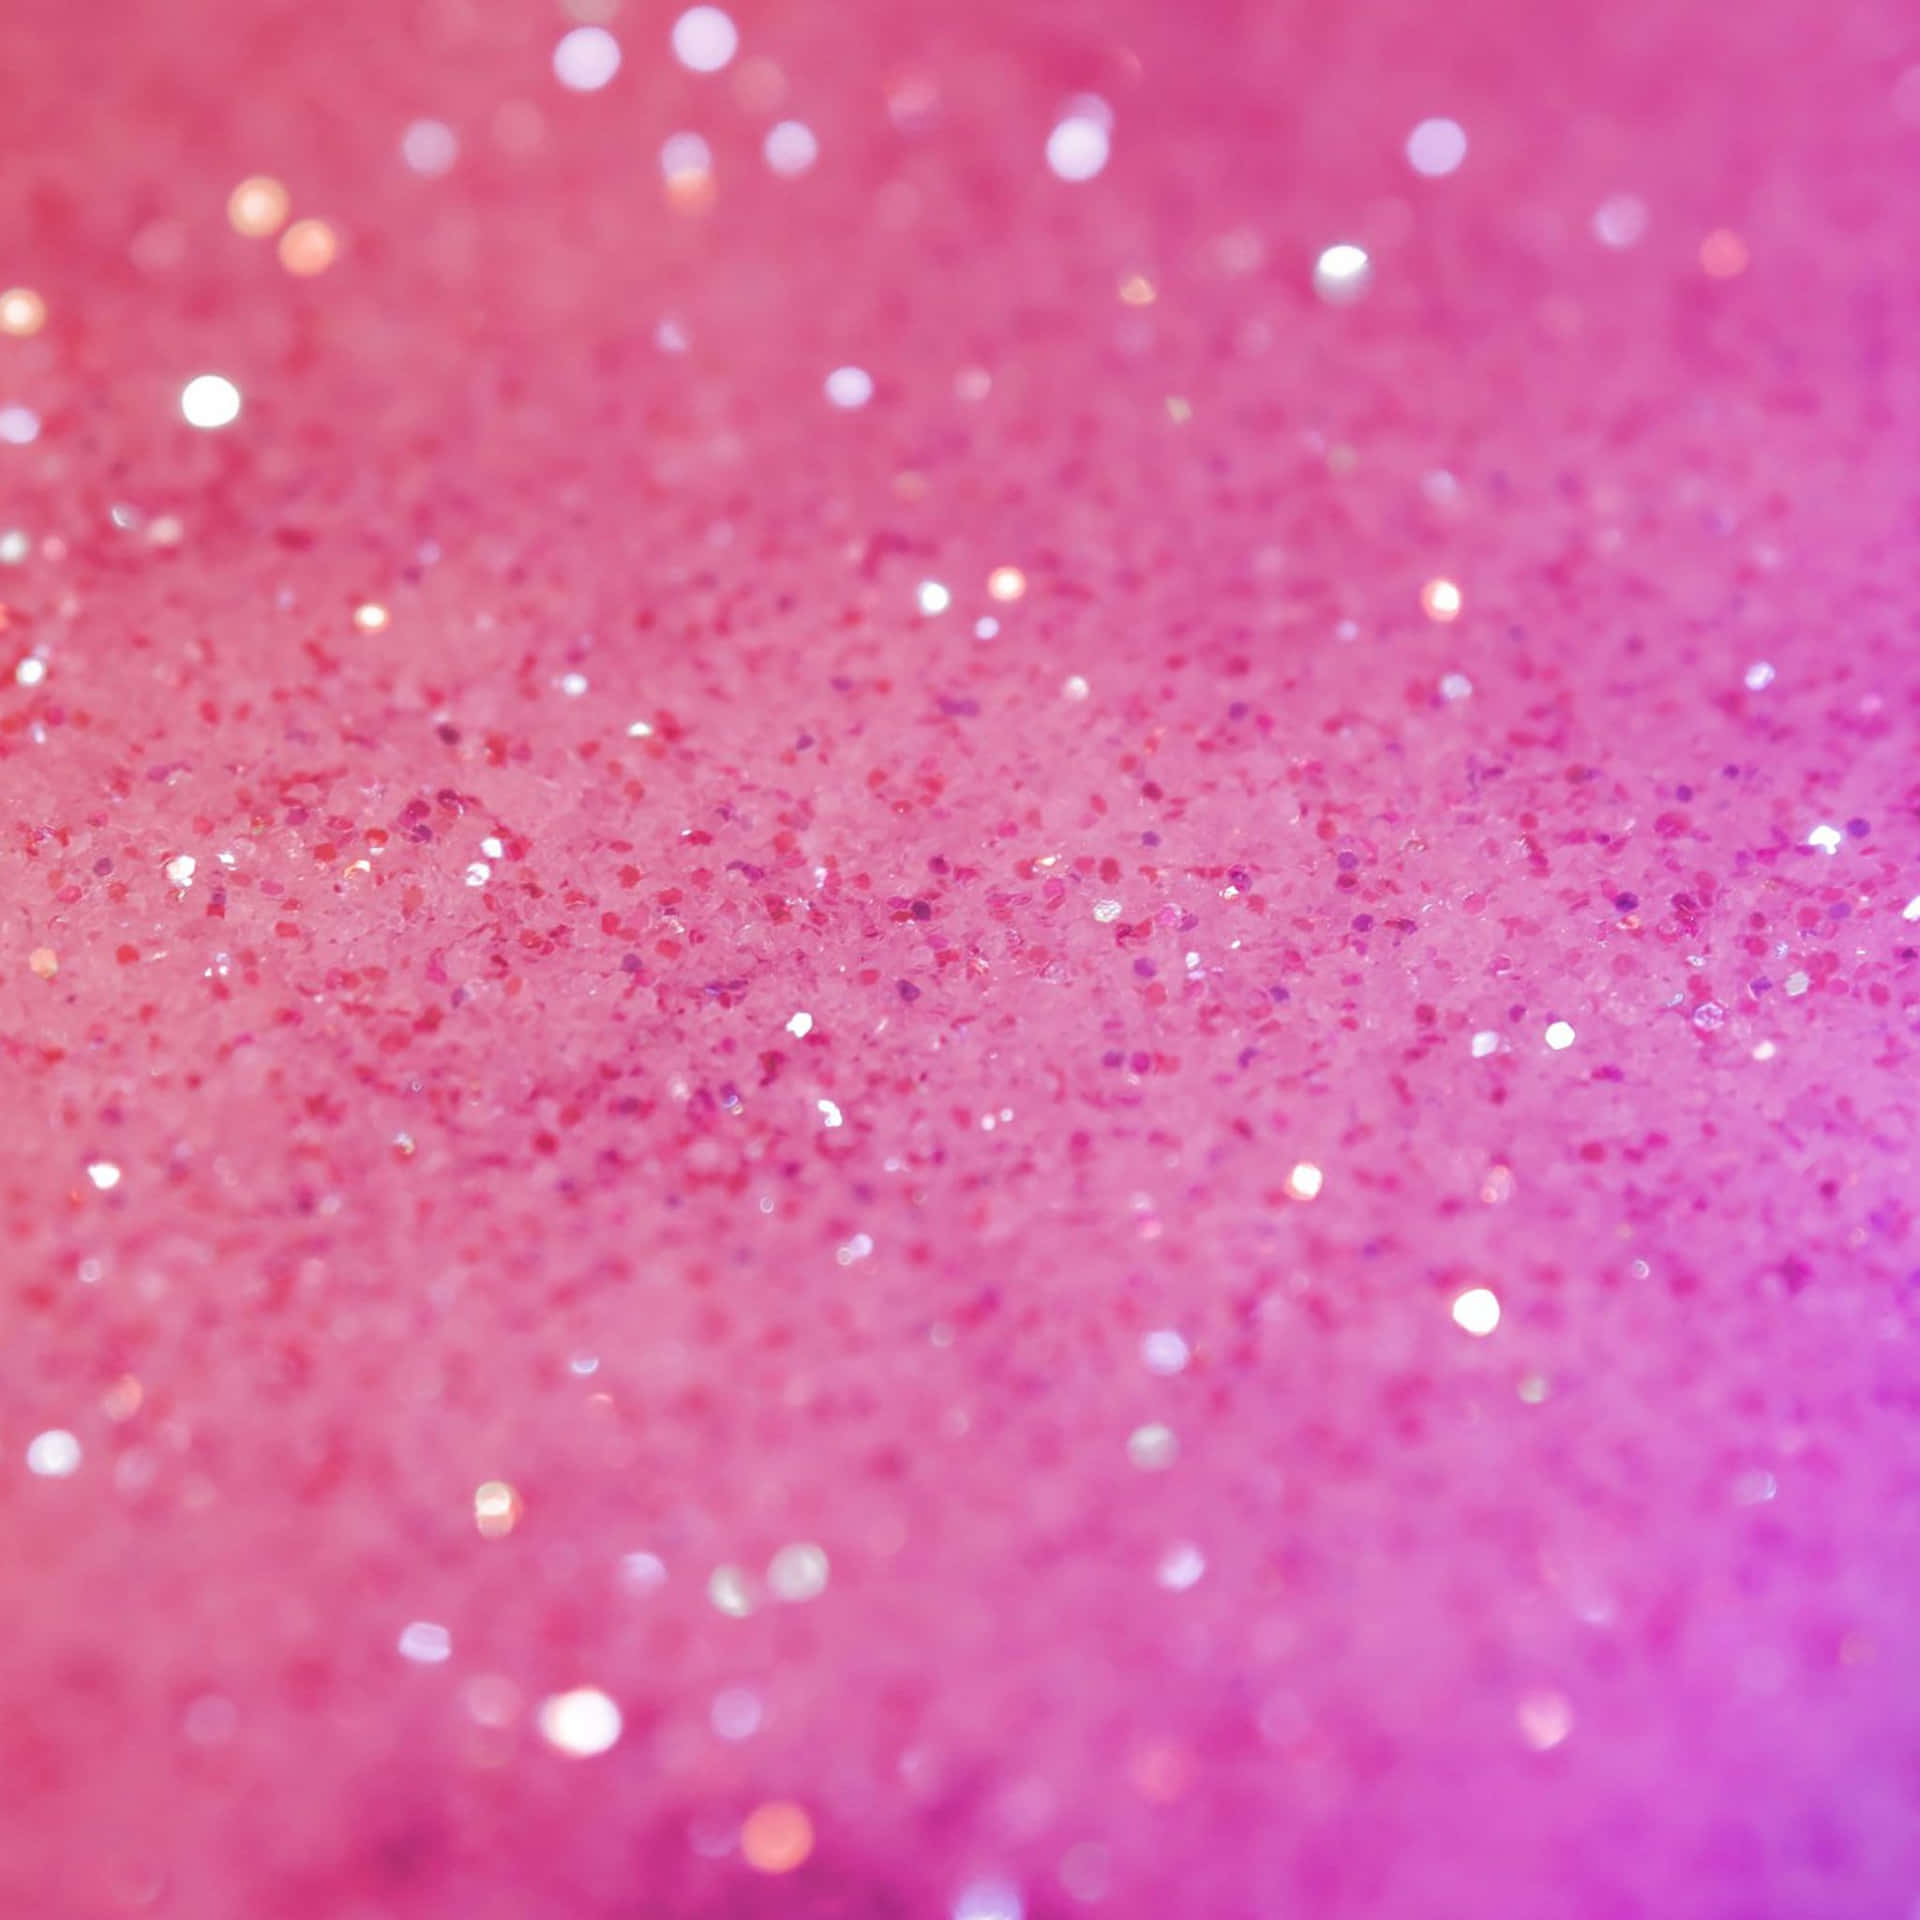 Pink Glitter Background With Sparkles Wallpaper